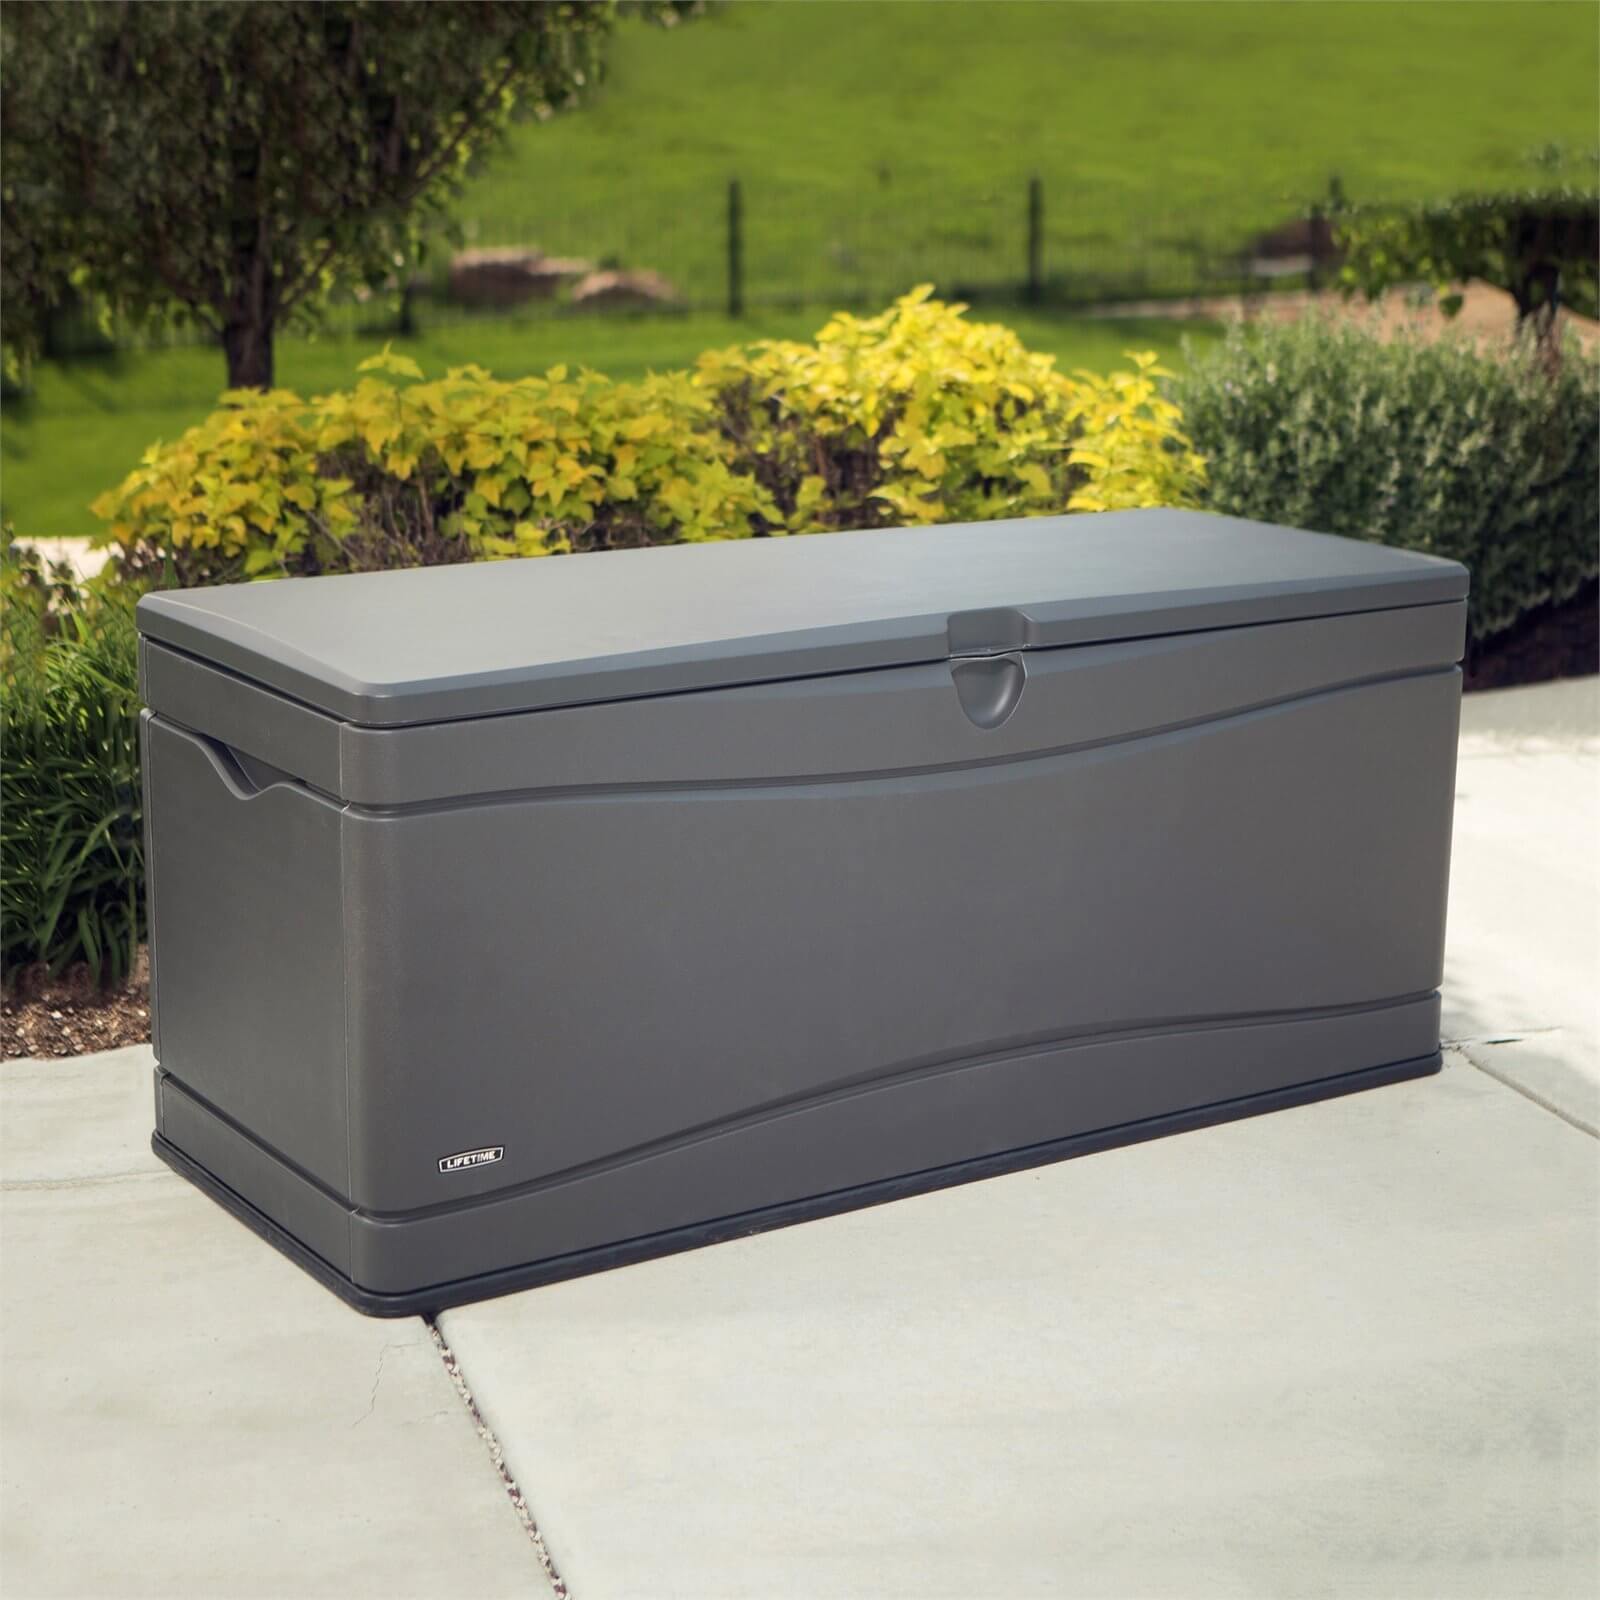 Lifetime Heavy Duty 492L Outdoor Deck Box - Carbonised Grey